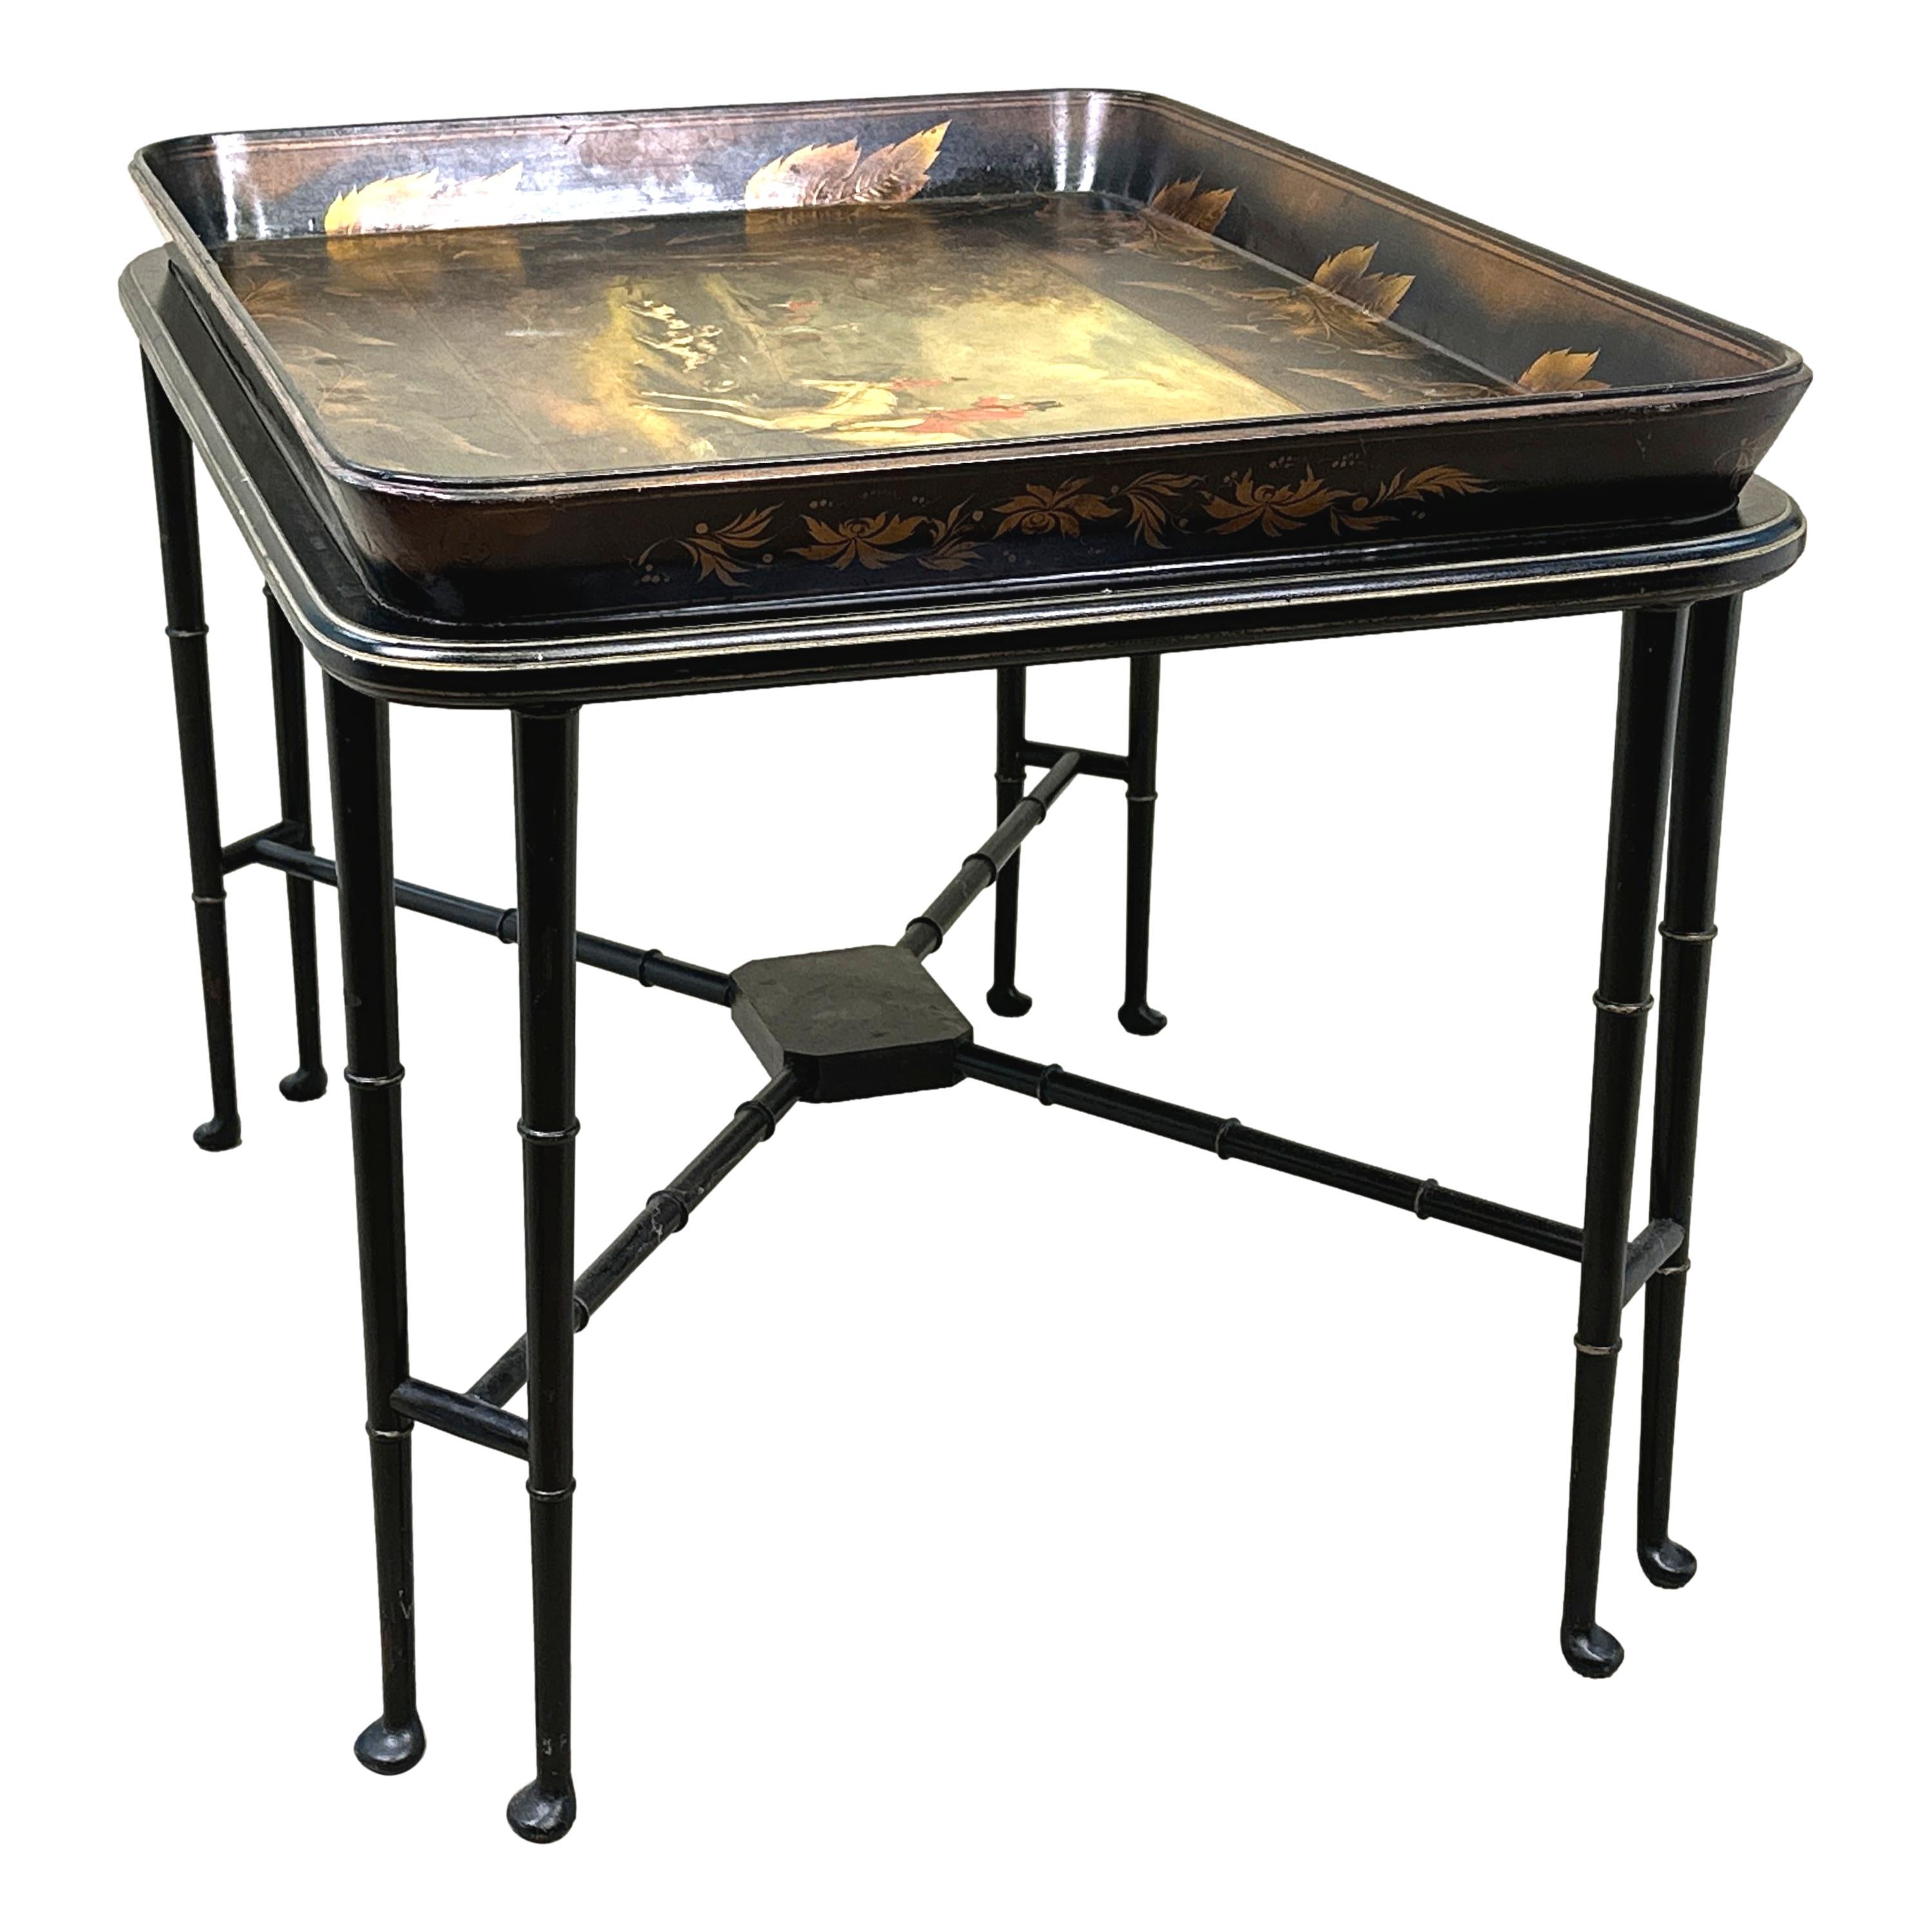 A Delightful Early 19th Century, George III Period, Papier Mache Rectangular Tray Having Black Laquered Background With Hand Painted Hunting Scene And Floral Decoration, House On Attractive Later Stand With Double Faux Bamboo Legs And Turned Pad